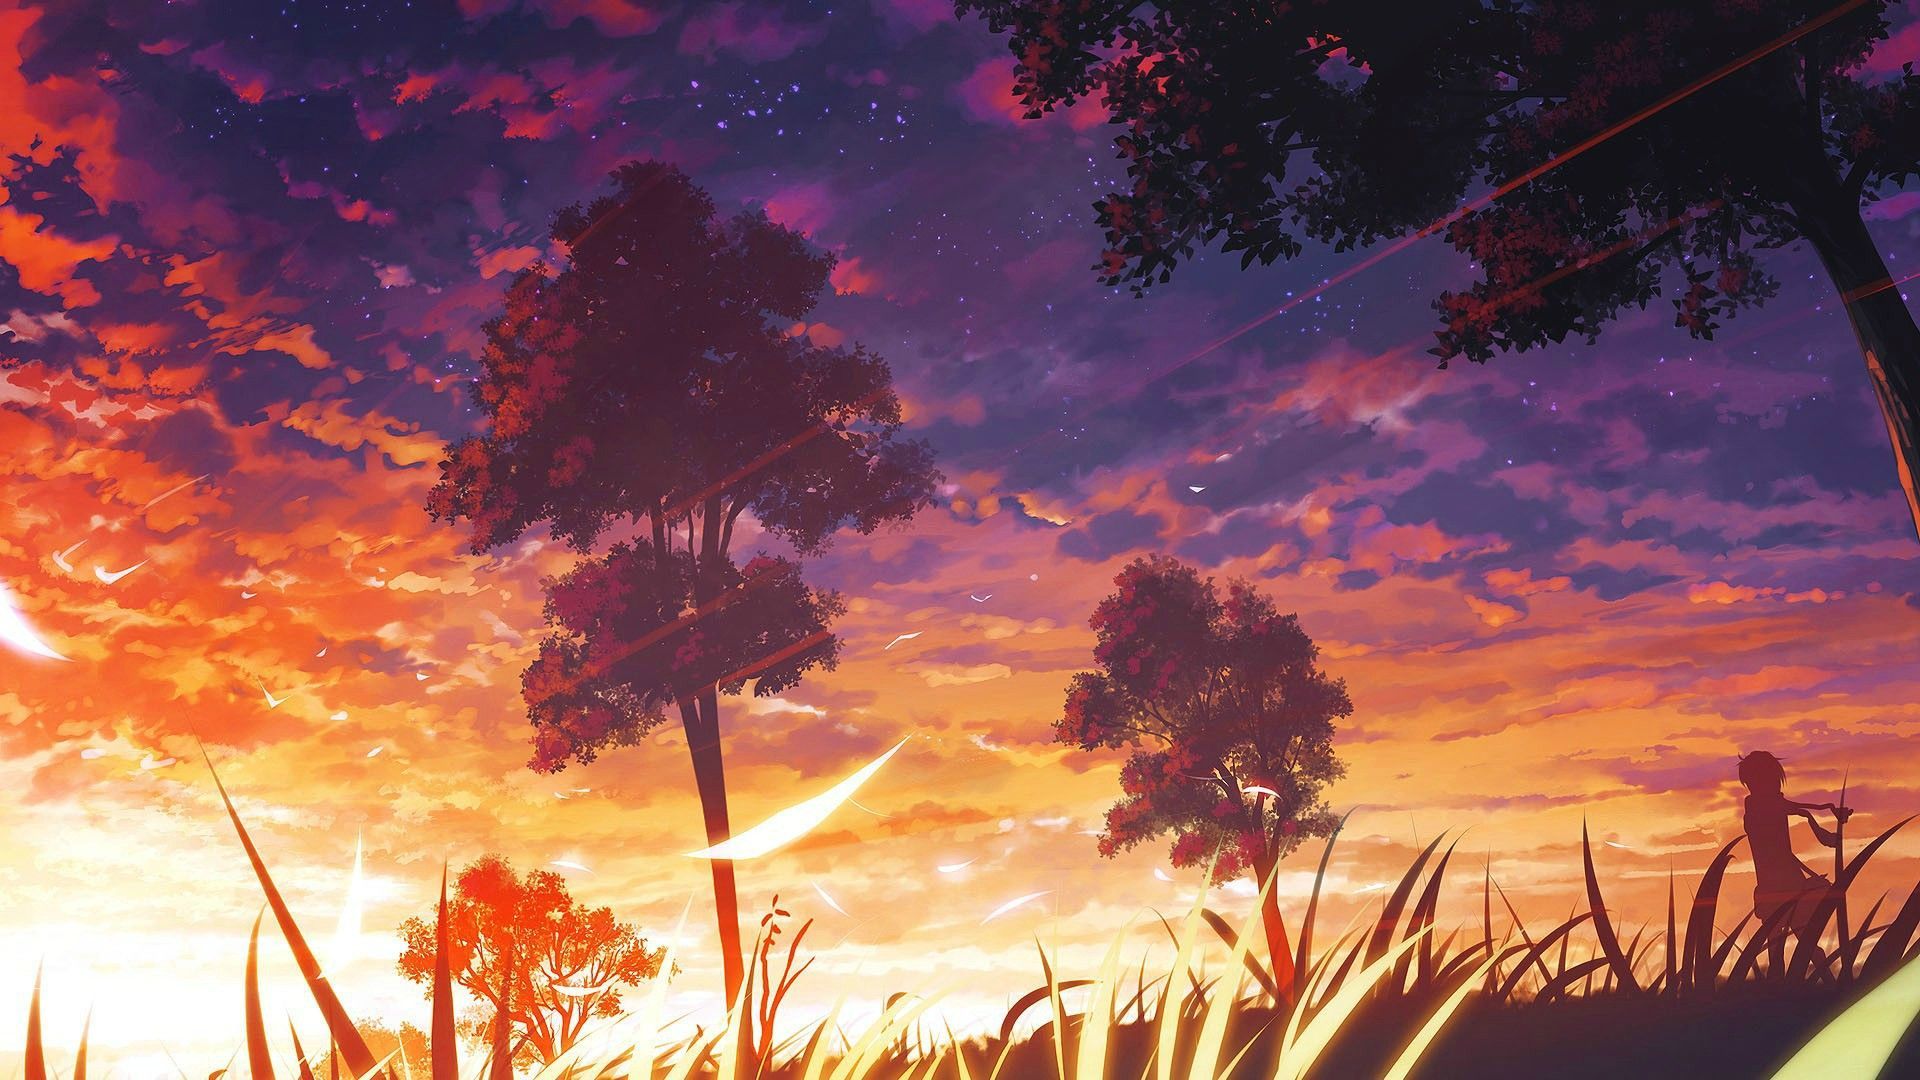 A mixture of 99 background I've collected over the years of browsing Imgur. Anime scenery wallpaper, Scenery wallpaper, Anime scenery